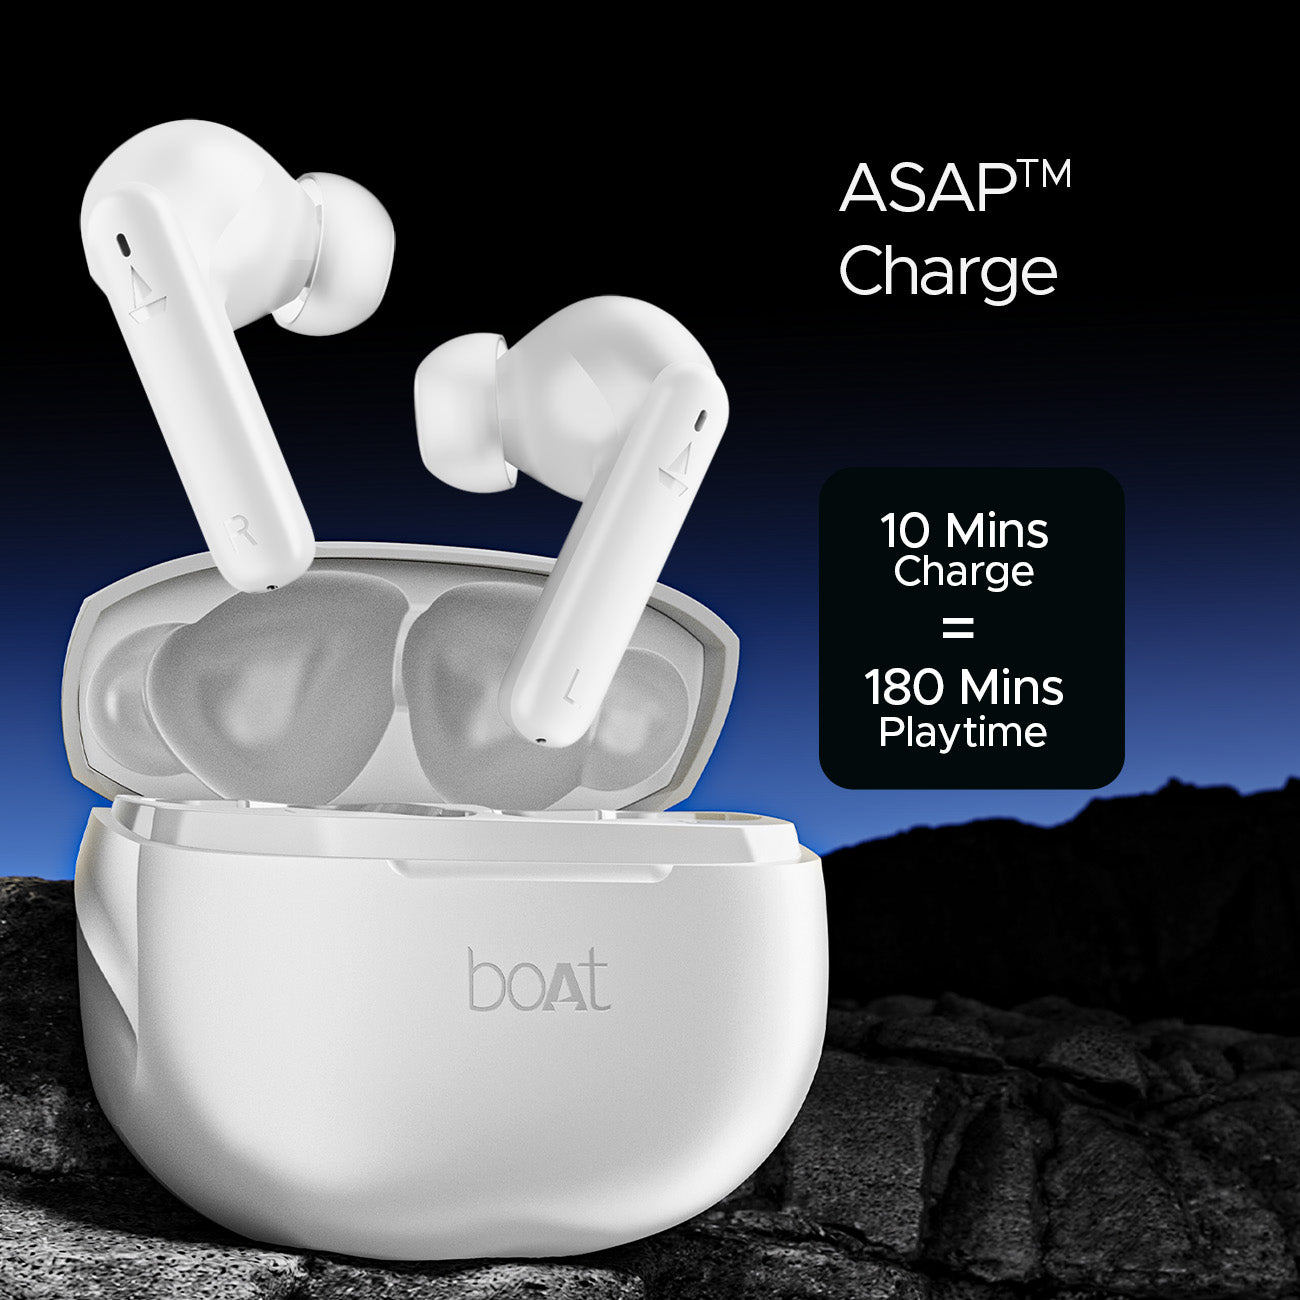 boAt Airdopes 170 | Wireless Bluetooth Earbuds with 13mm Drivers, Upto 50 Hours of battery life, BEAST™ Mode, Quad Mics with ENx™ Technology